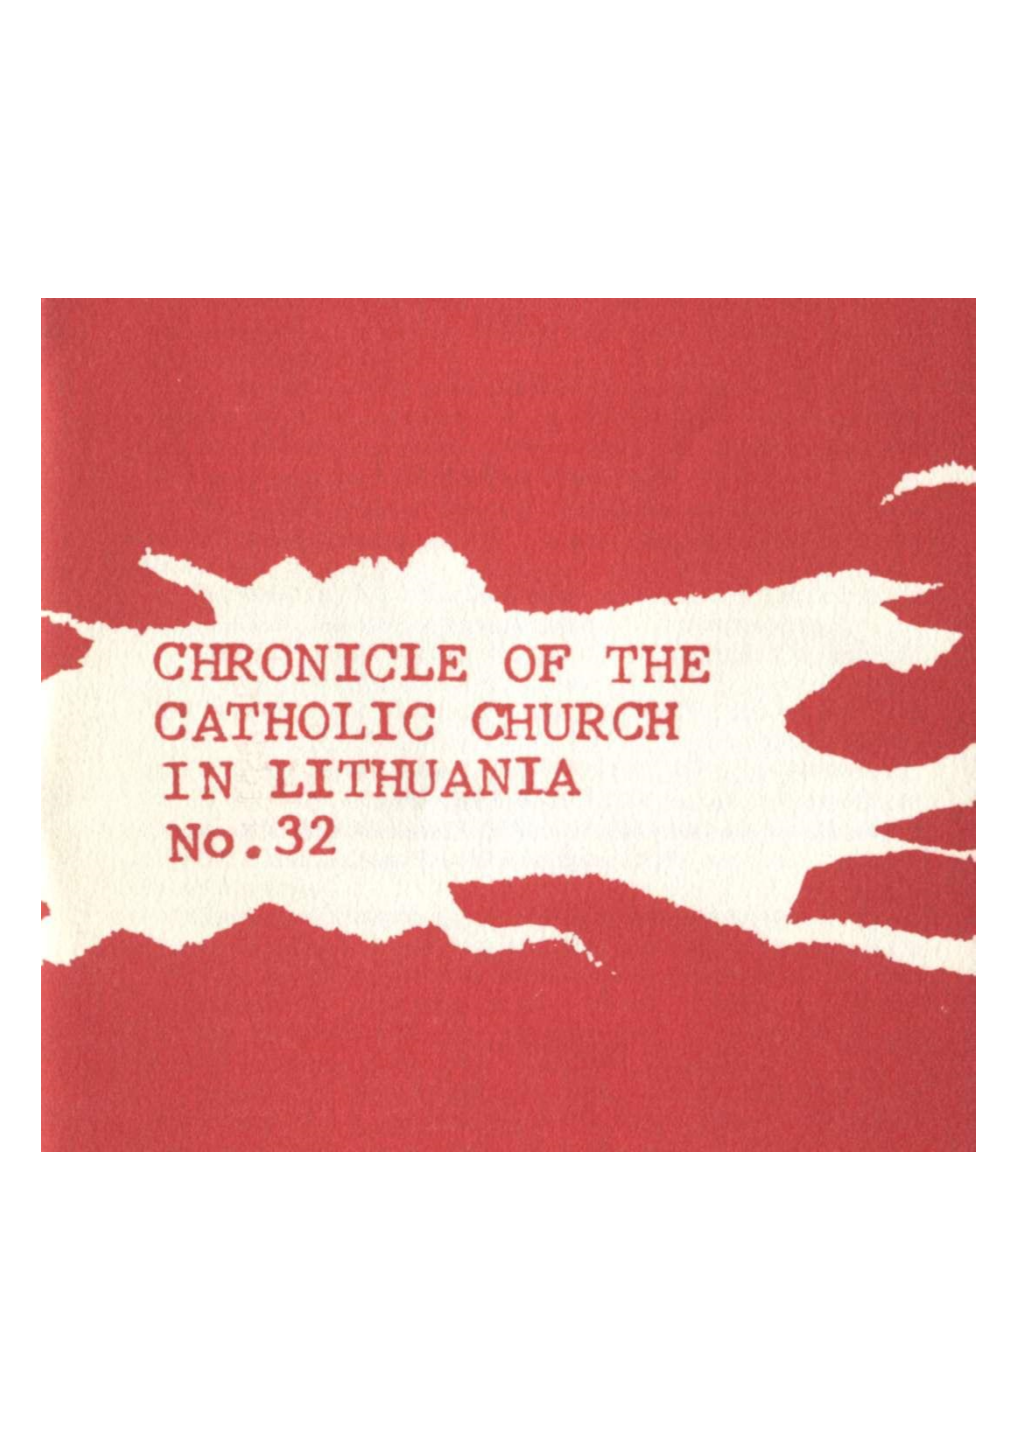 CHRONICLE of the CATHOLIC CHURCH in LITHUANIA No. 32